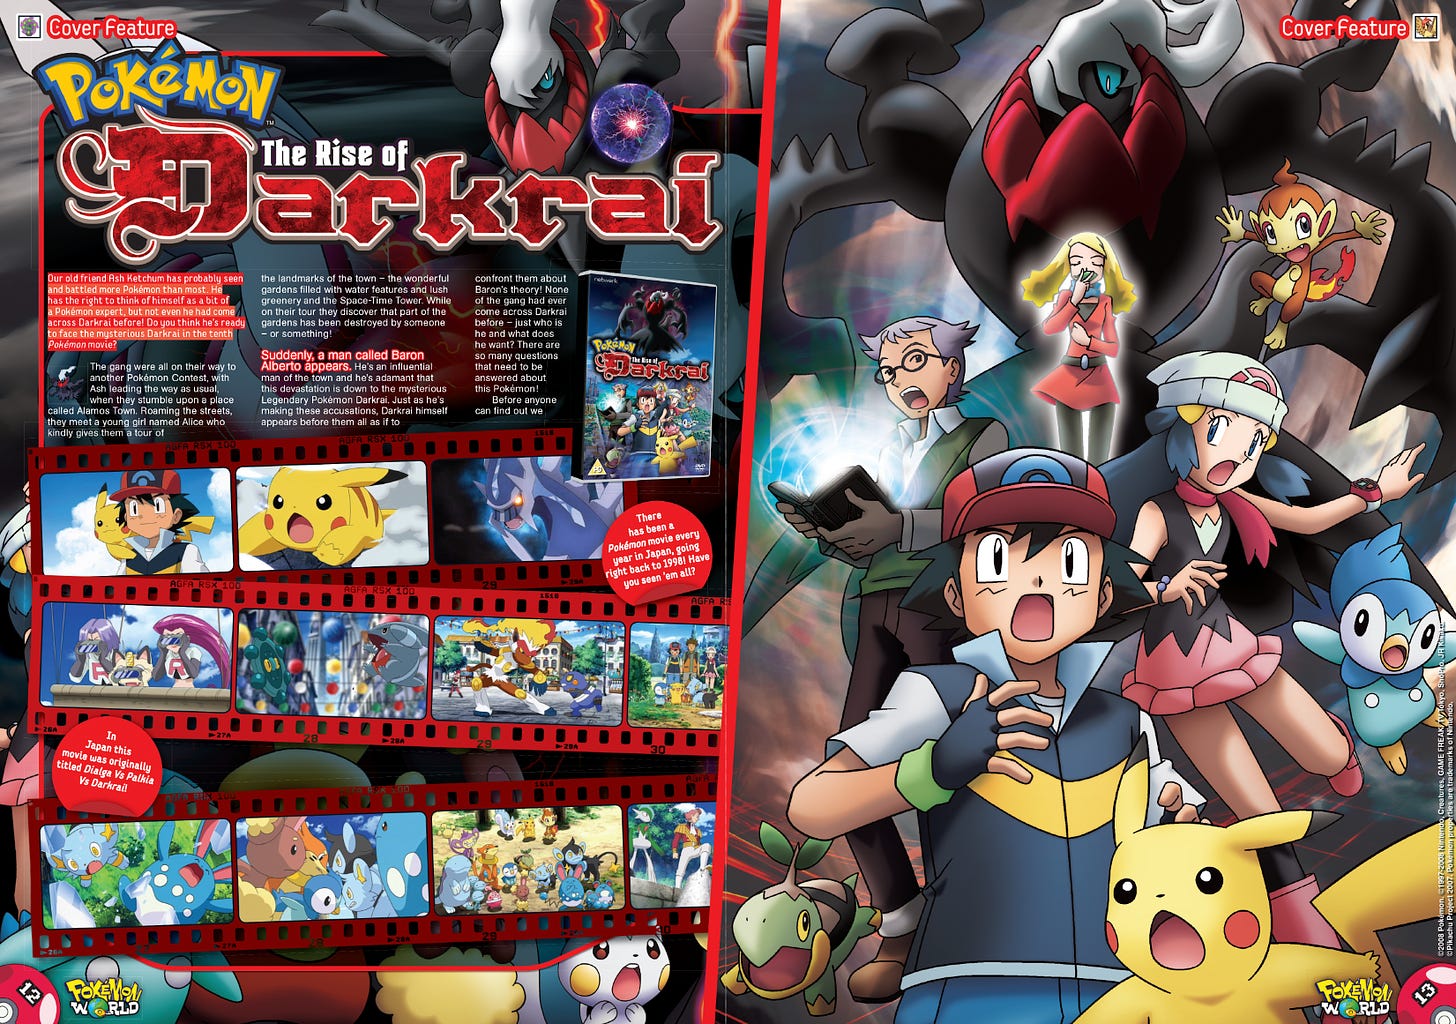 A cover feature of the Pokémon movie: The Rise of Darkrai